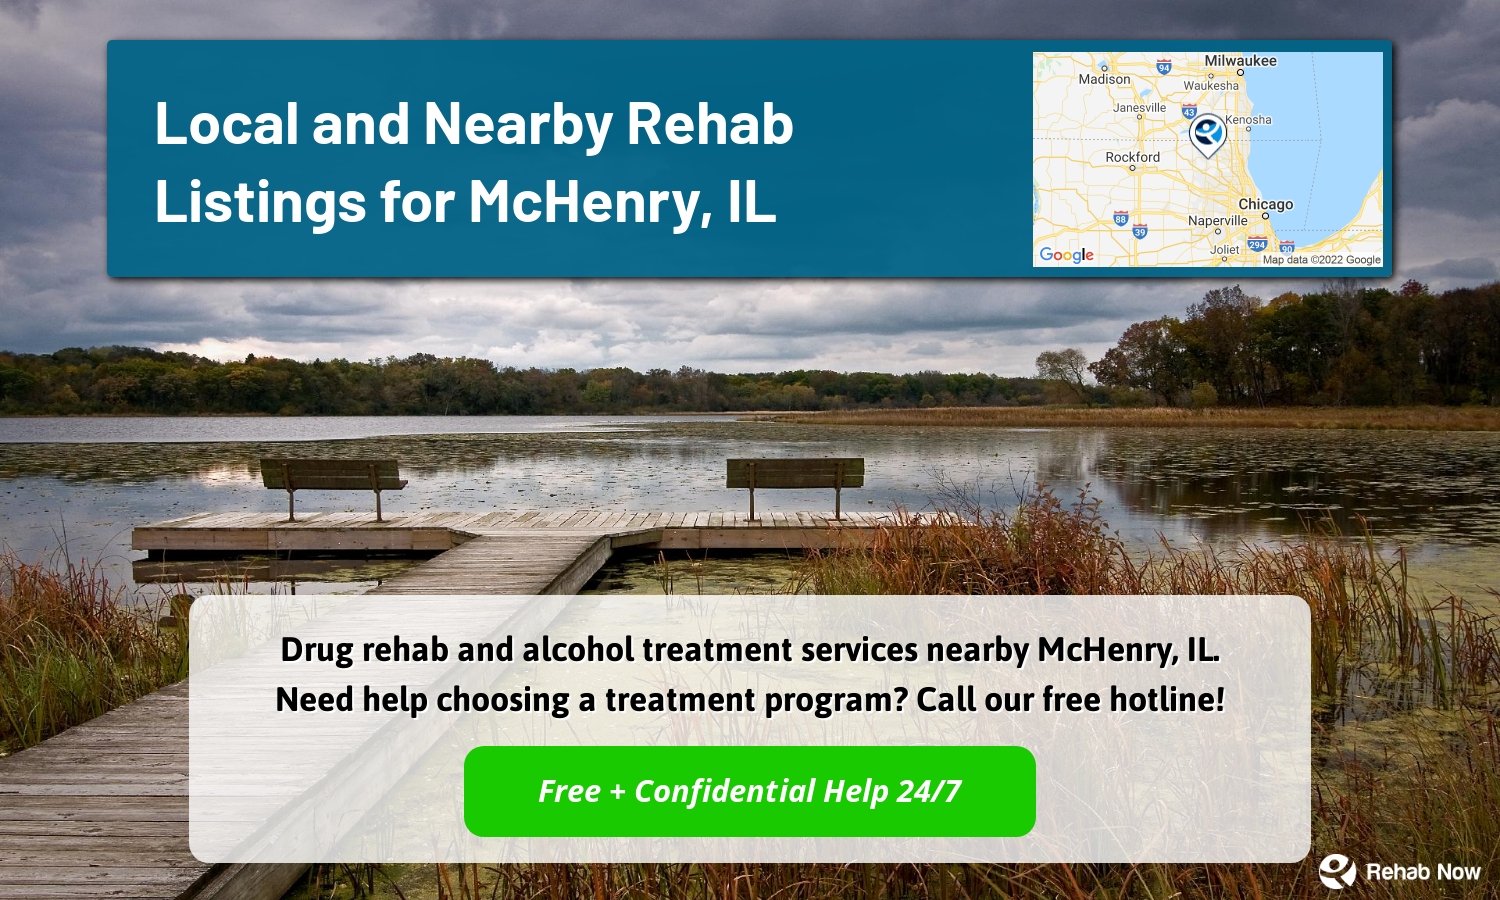 Drug rehab and alcohol treatment services nearby McHenry, IL. Need help choosing a treatment program? Call our free hotline!